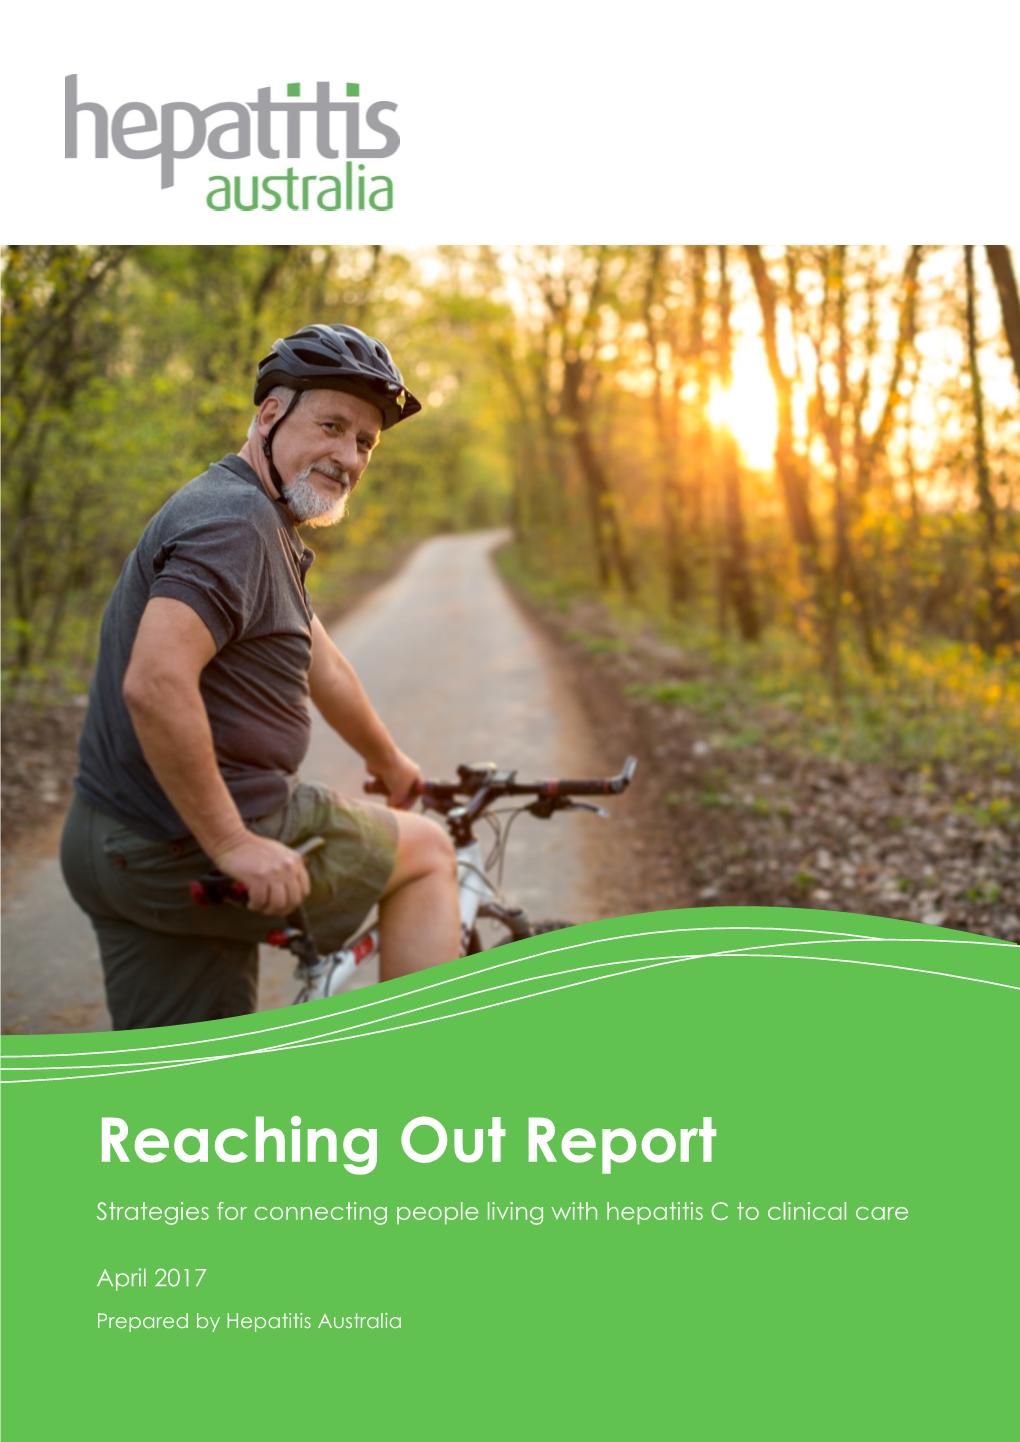 Reaching out Report Strategies for Connecting People Living with Hepatitis C to Clinical Care